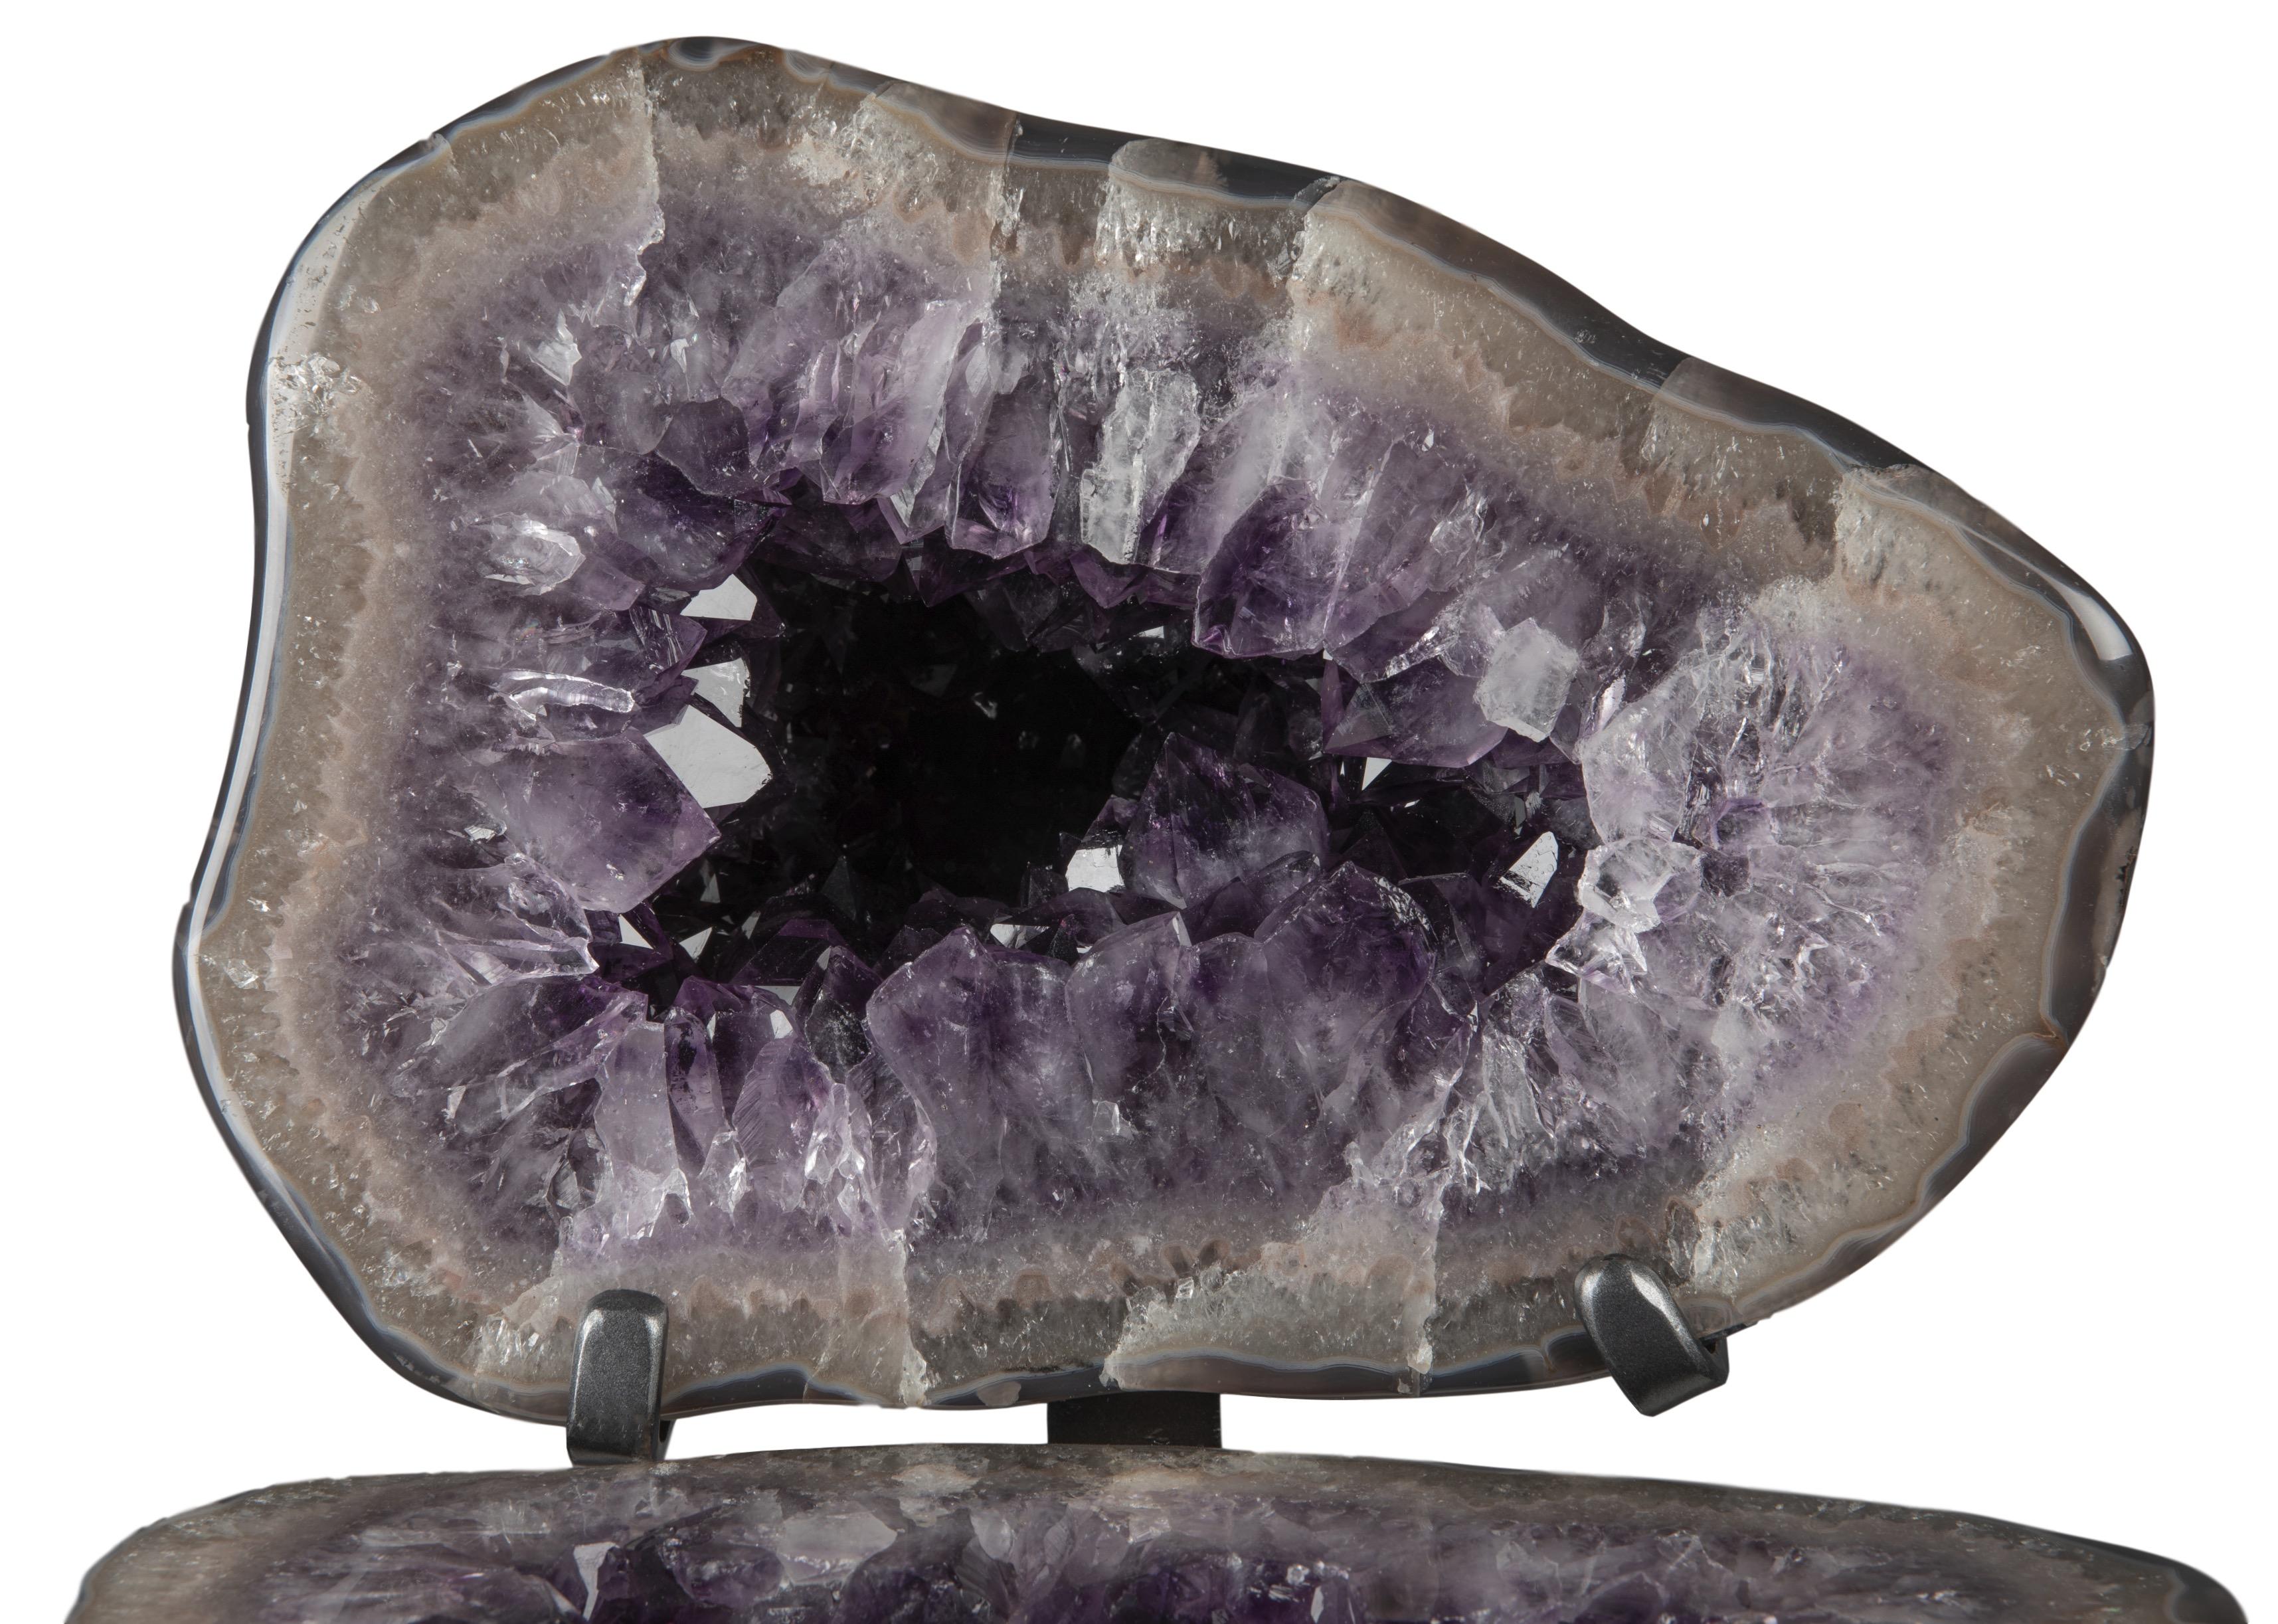 amethyst on stand